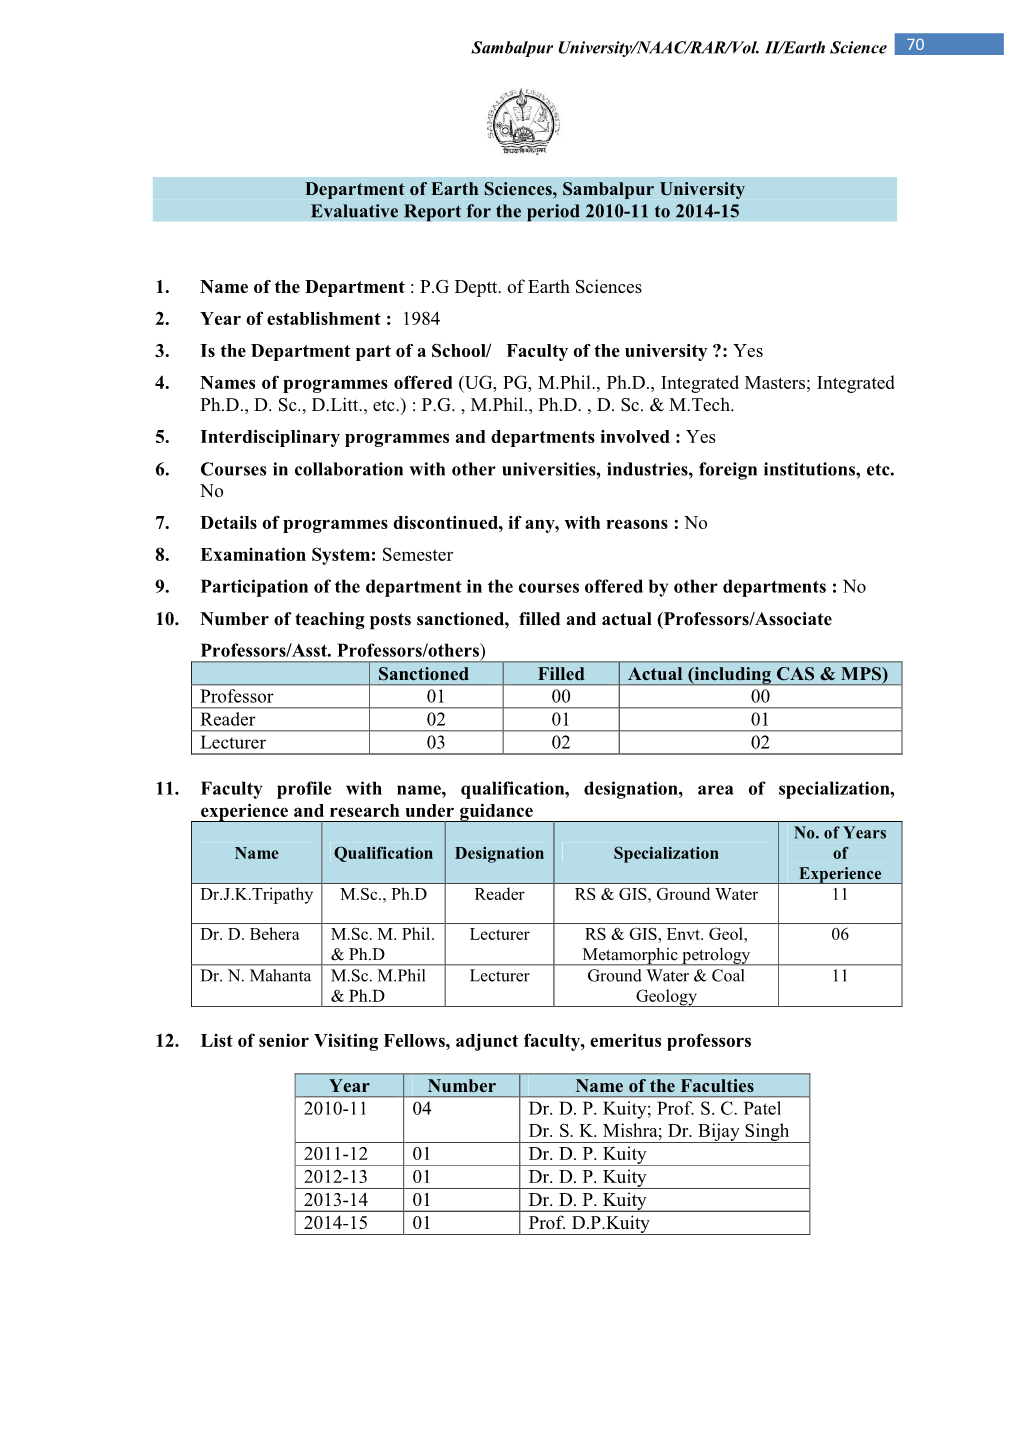 Department of Earth Sciences, Sambalpur University Evaluative Report for the Period 2010-11 to 2014-15